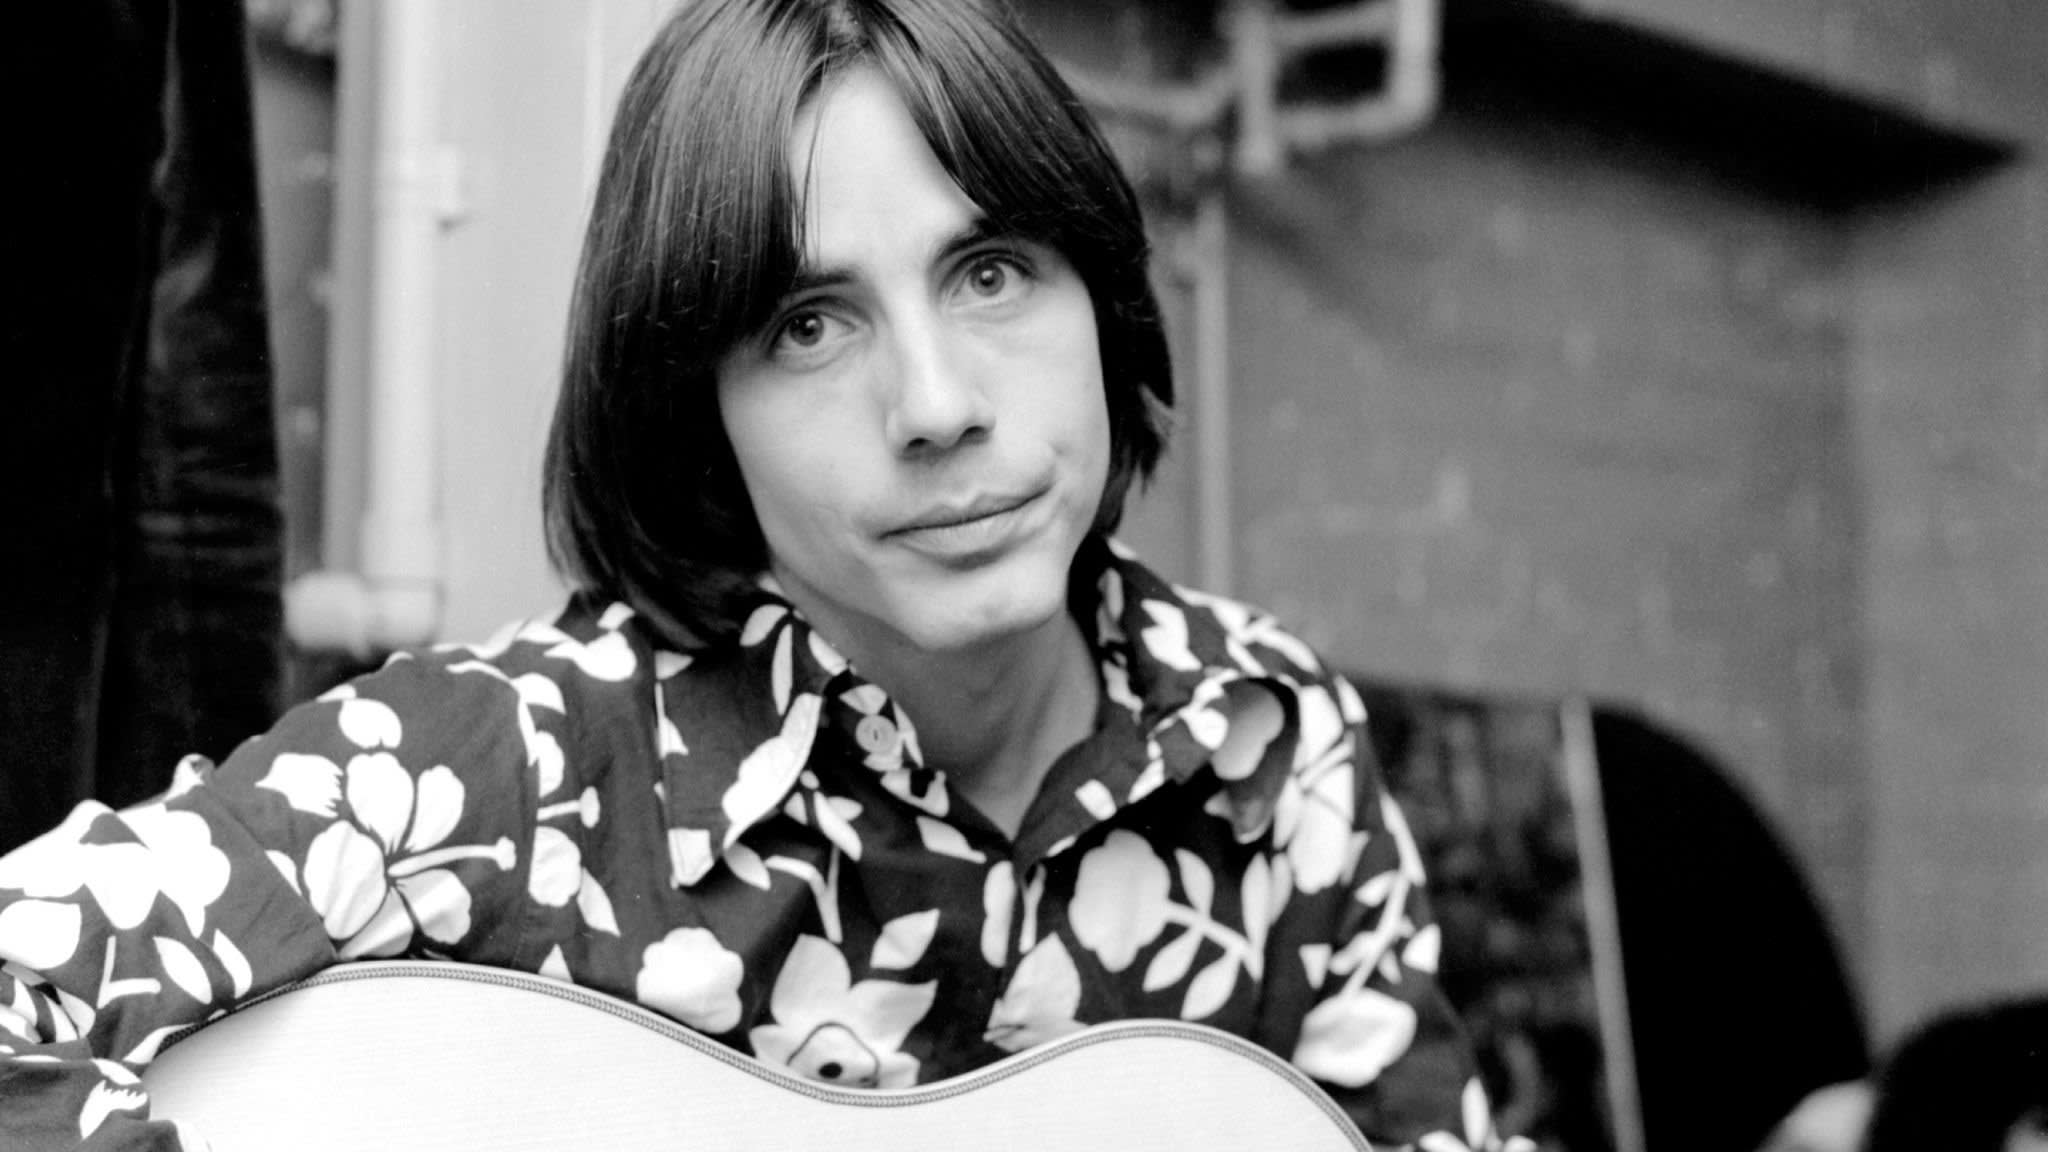 Jackson Browne still present after all these years